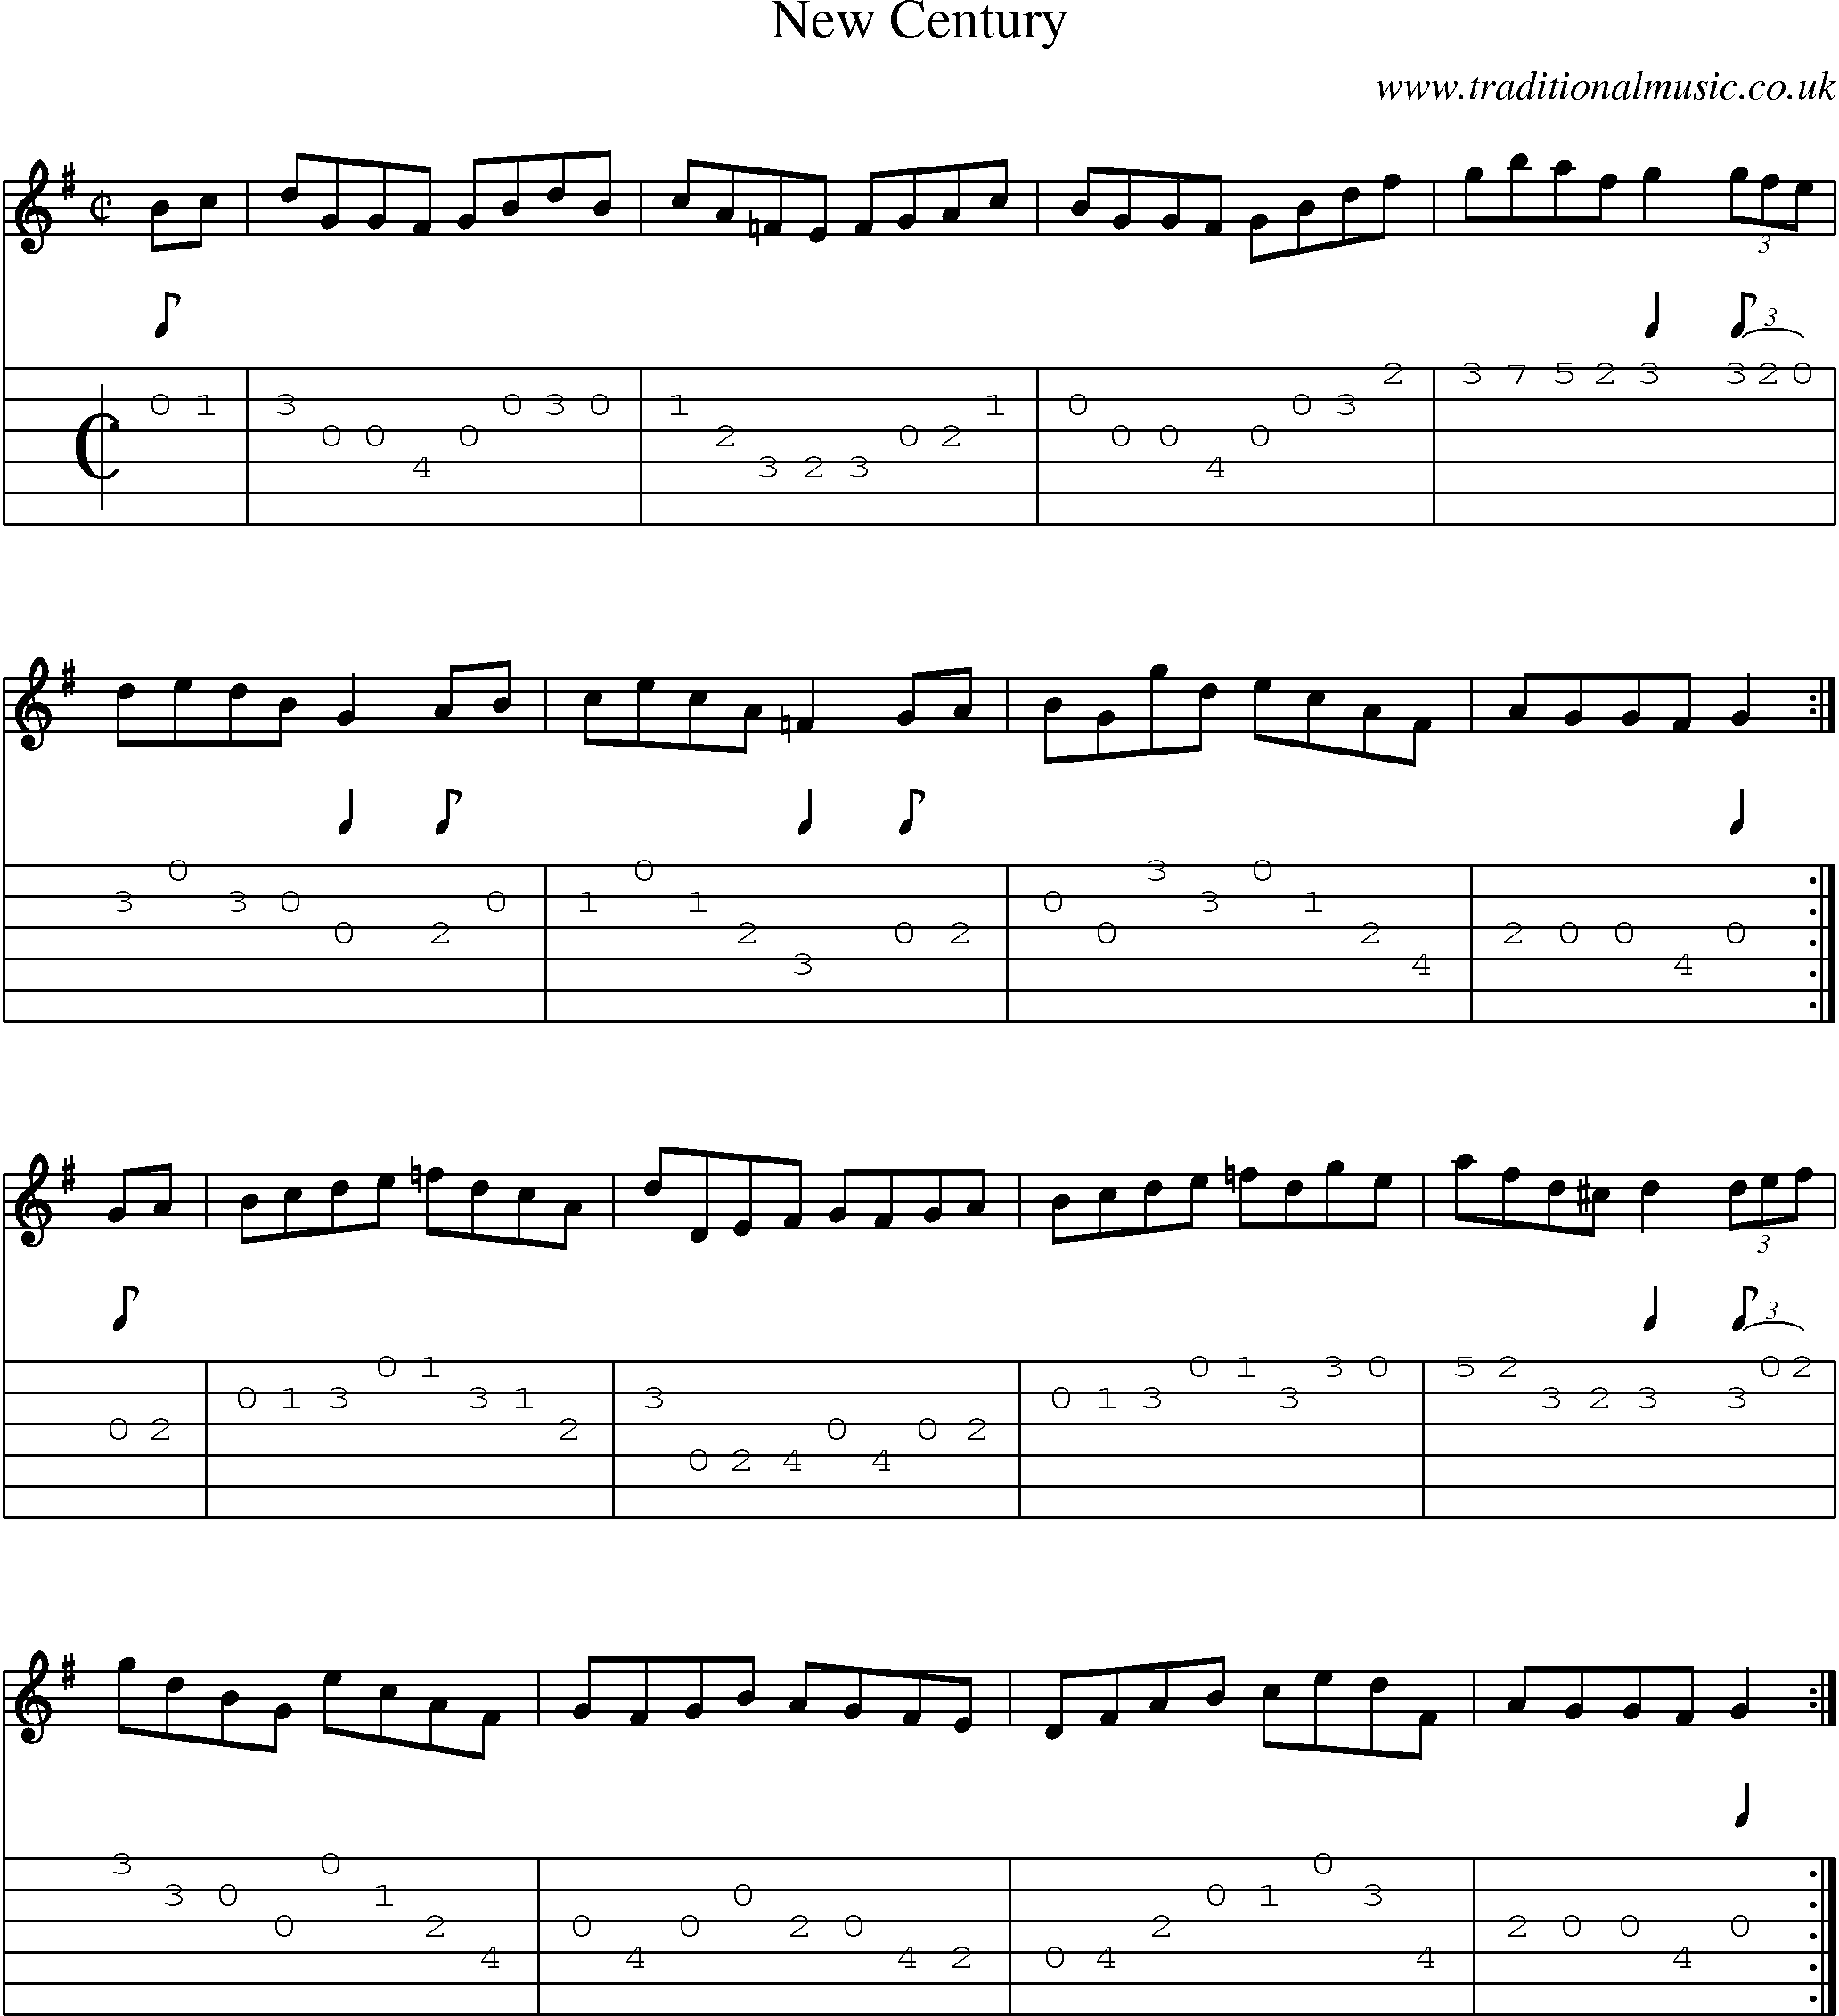 Music Score and Guitar Tabs for New Century